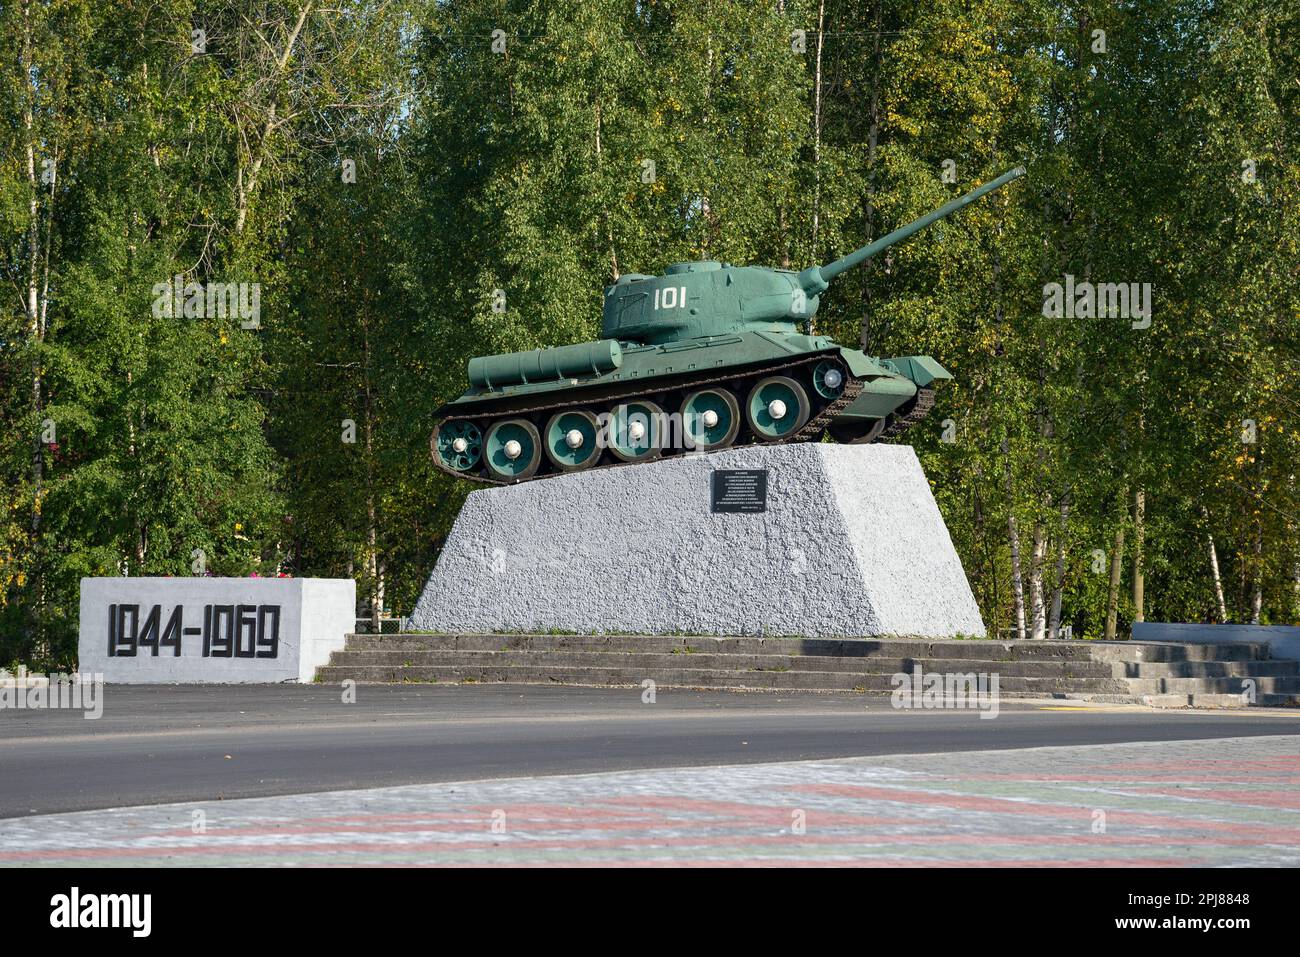 MEDVEZHYEGORSK, RUSSIA - AUGUST 17, 2019: Monument to Tank T-34. Monument in honor of the twenty-fifth anniversary of the liberation of Medvezhyegorsk Stock Photo